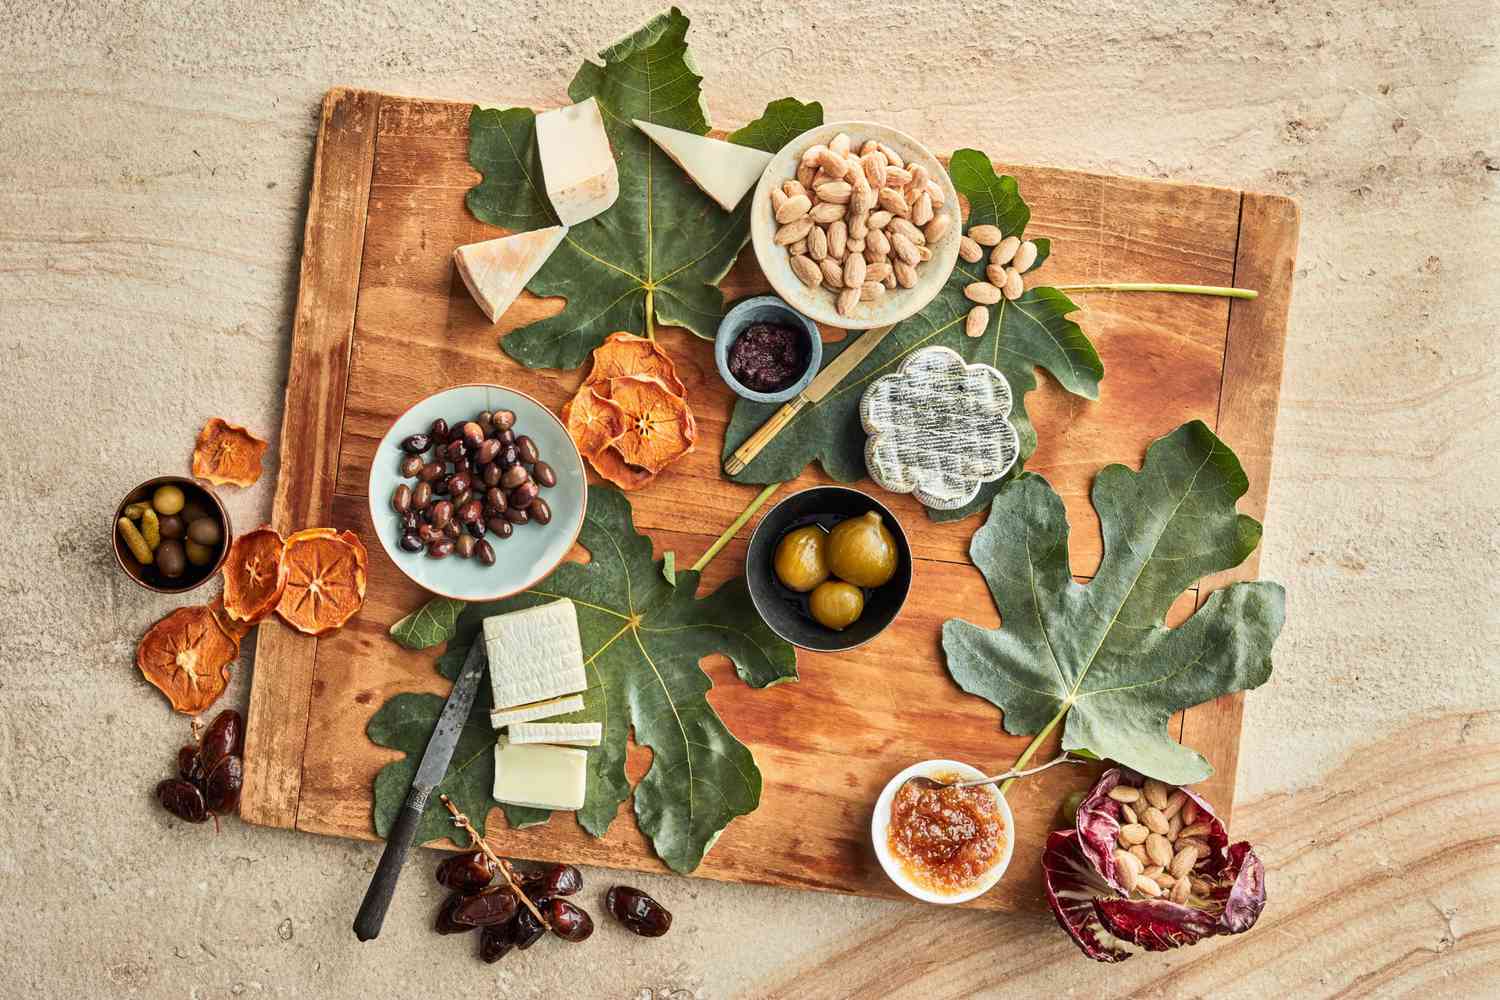 Wooden serving board with leaves, nuts, and olives